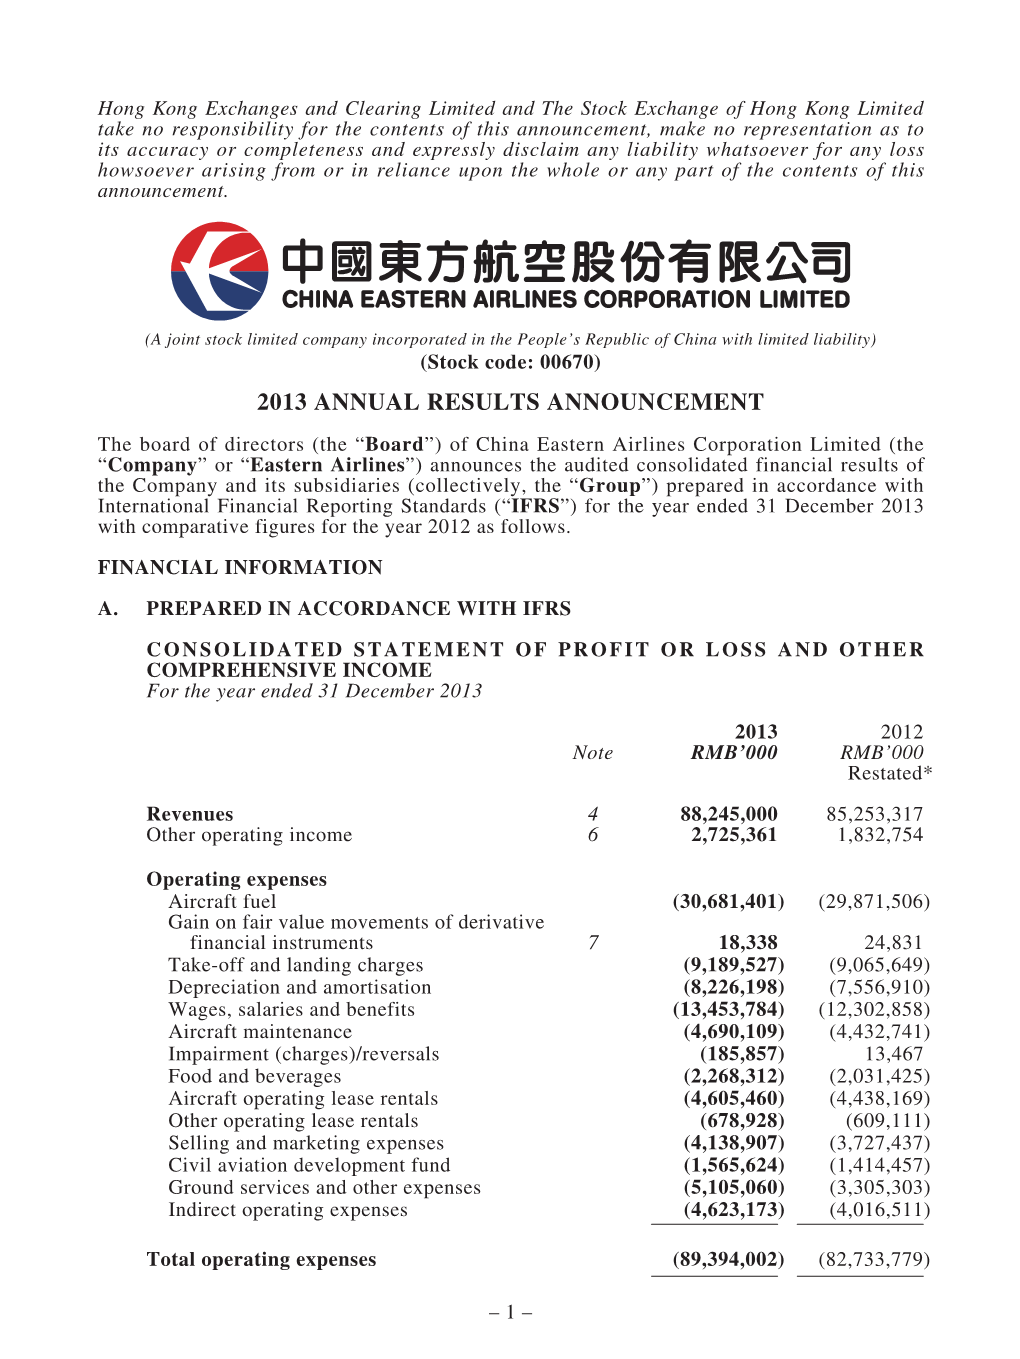 2013 Annual Results Announcement